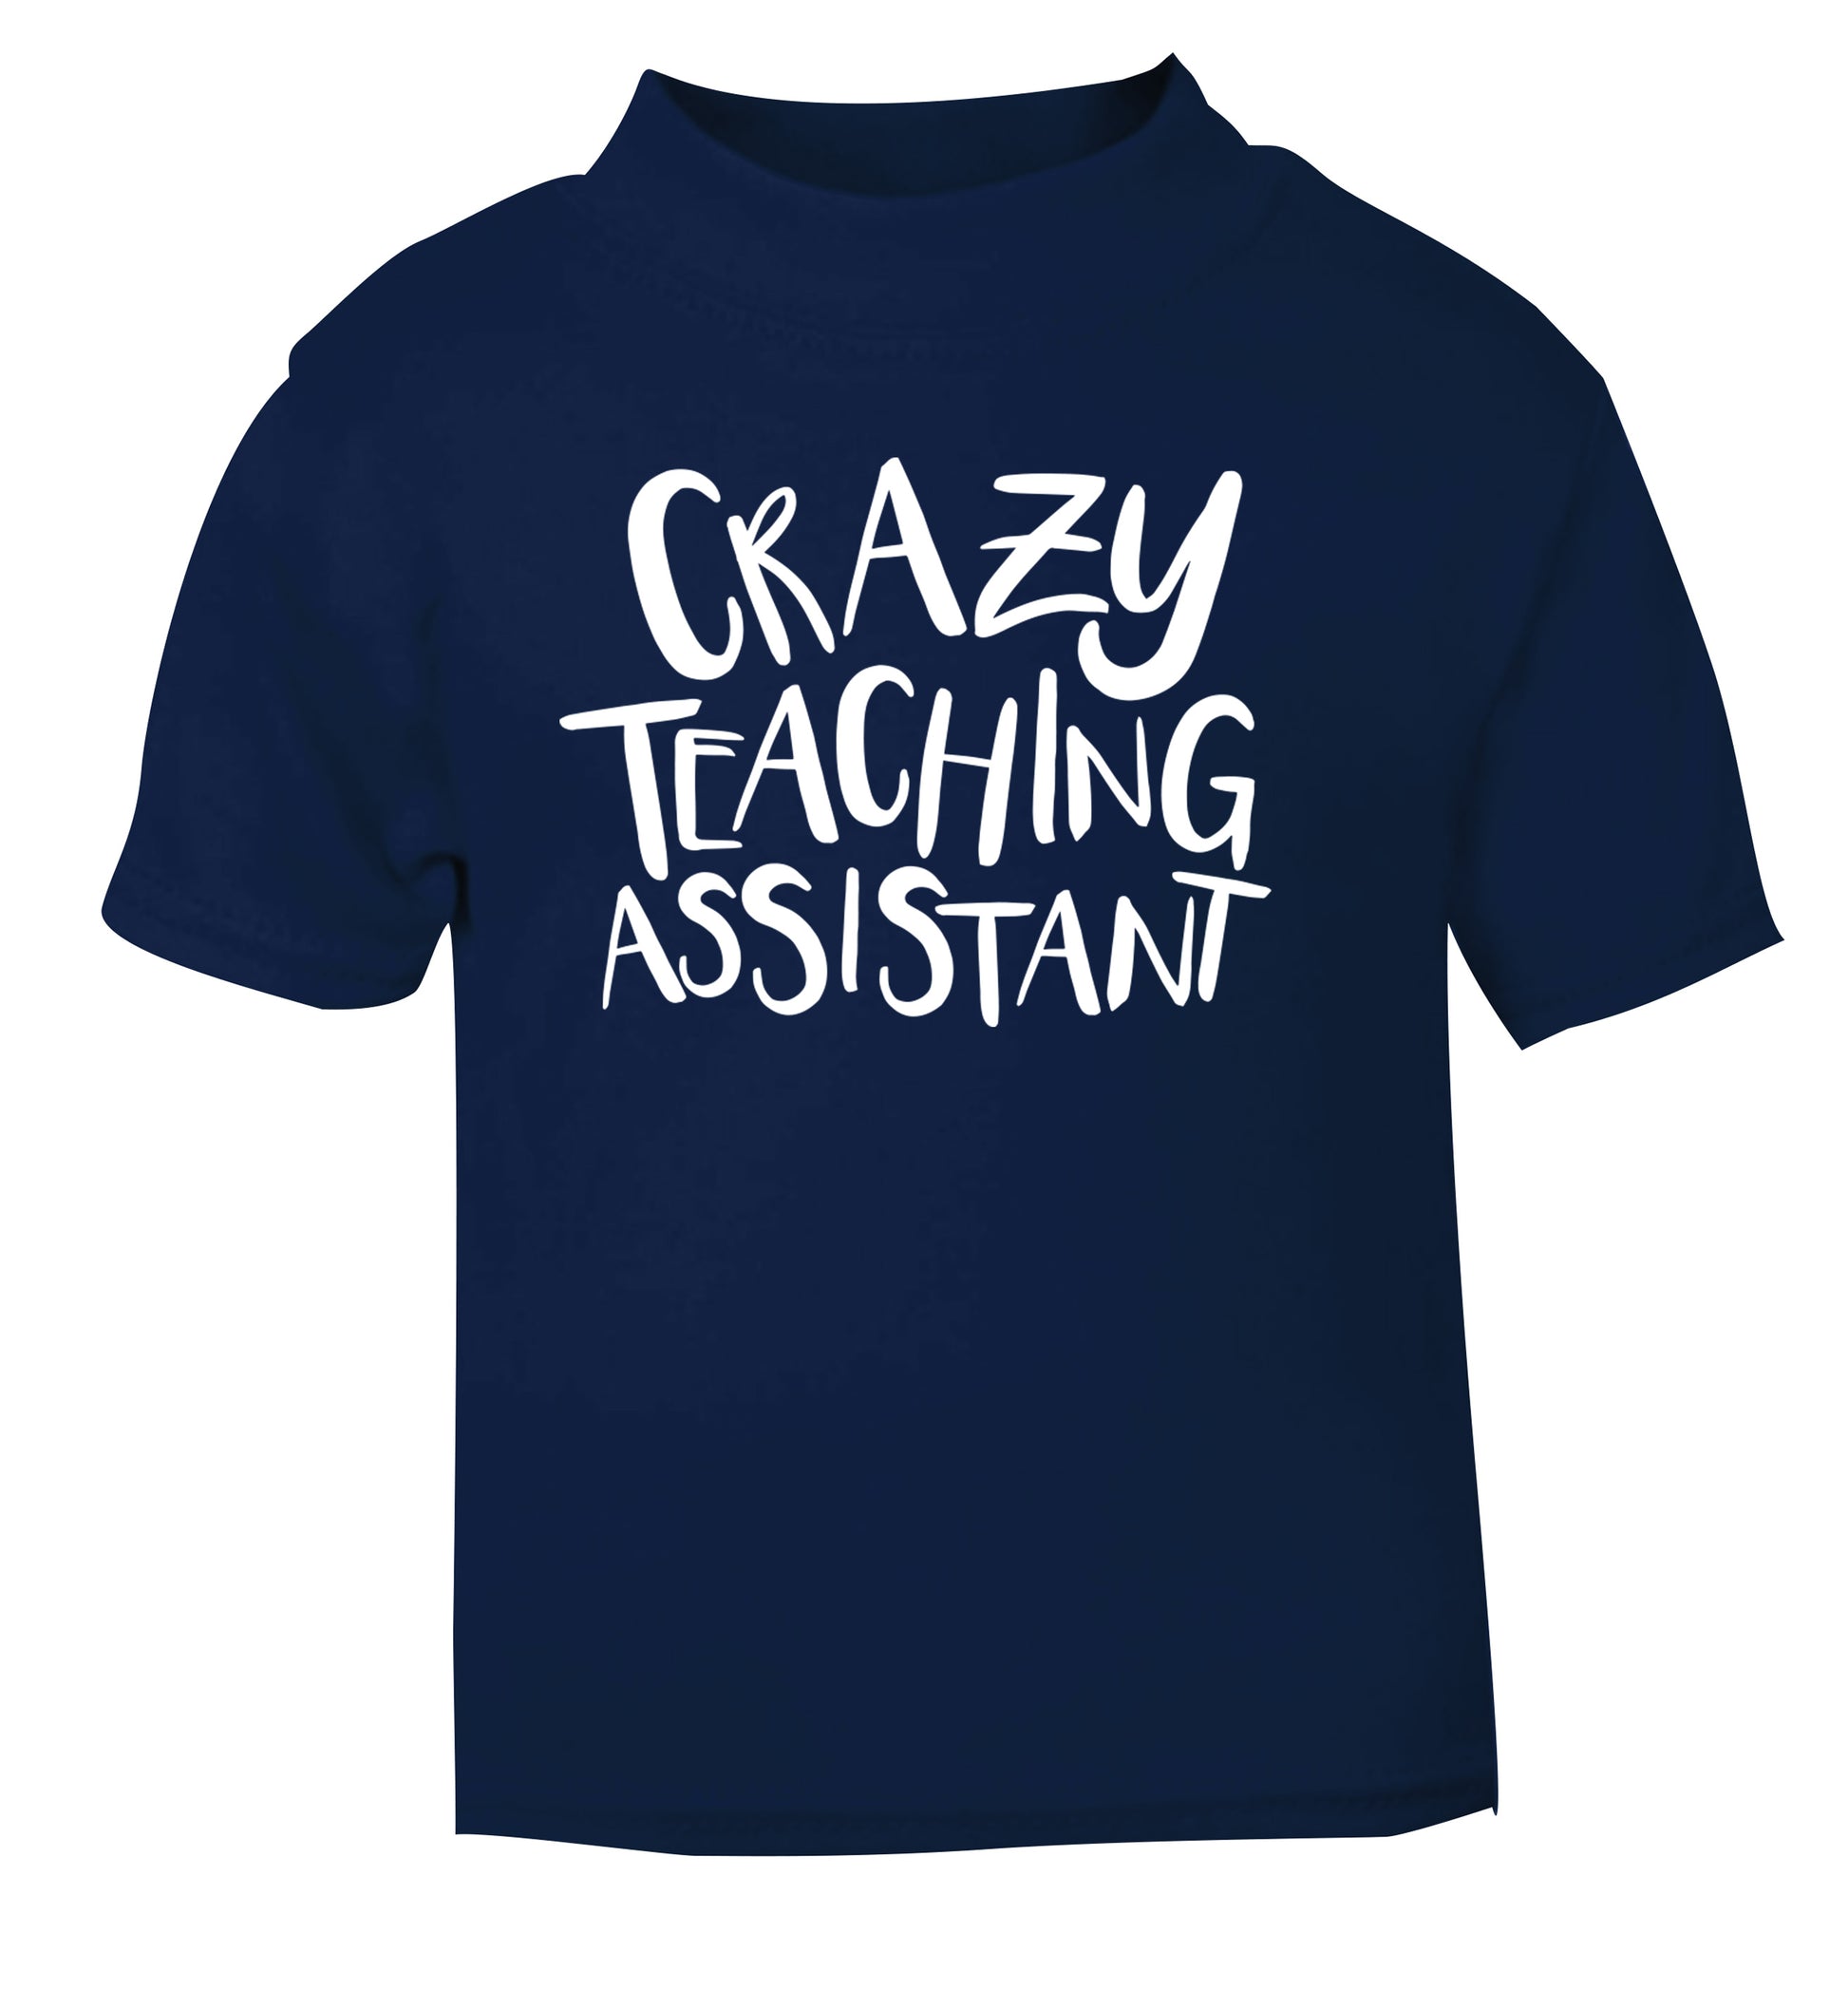 Crazy Teaching Assistant navy Baby Toddler Tshirt 2 Years